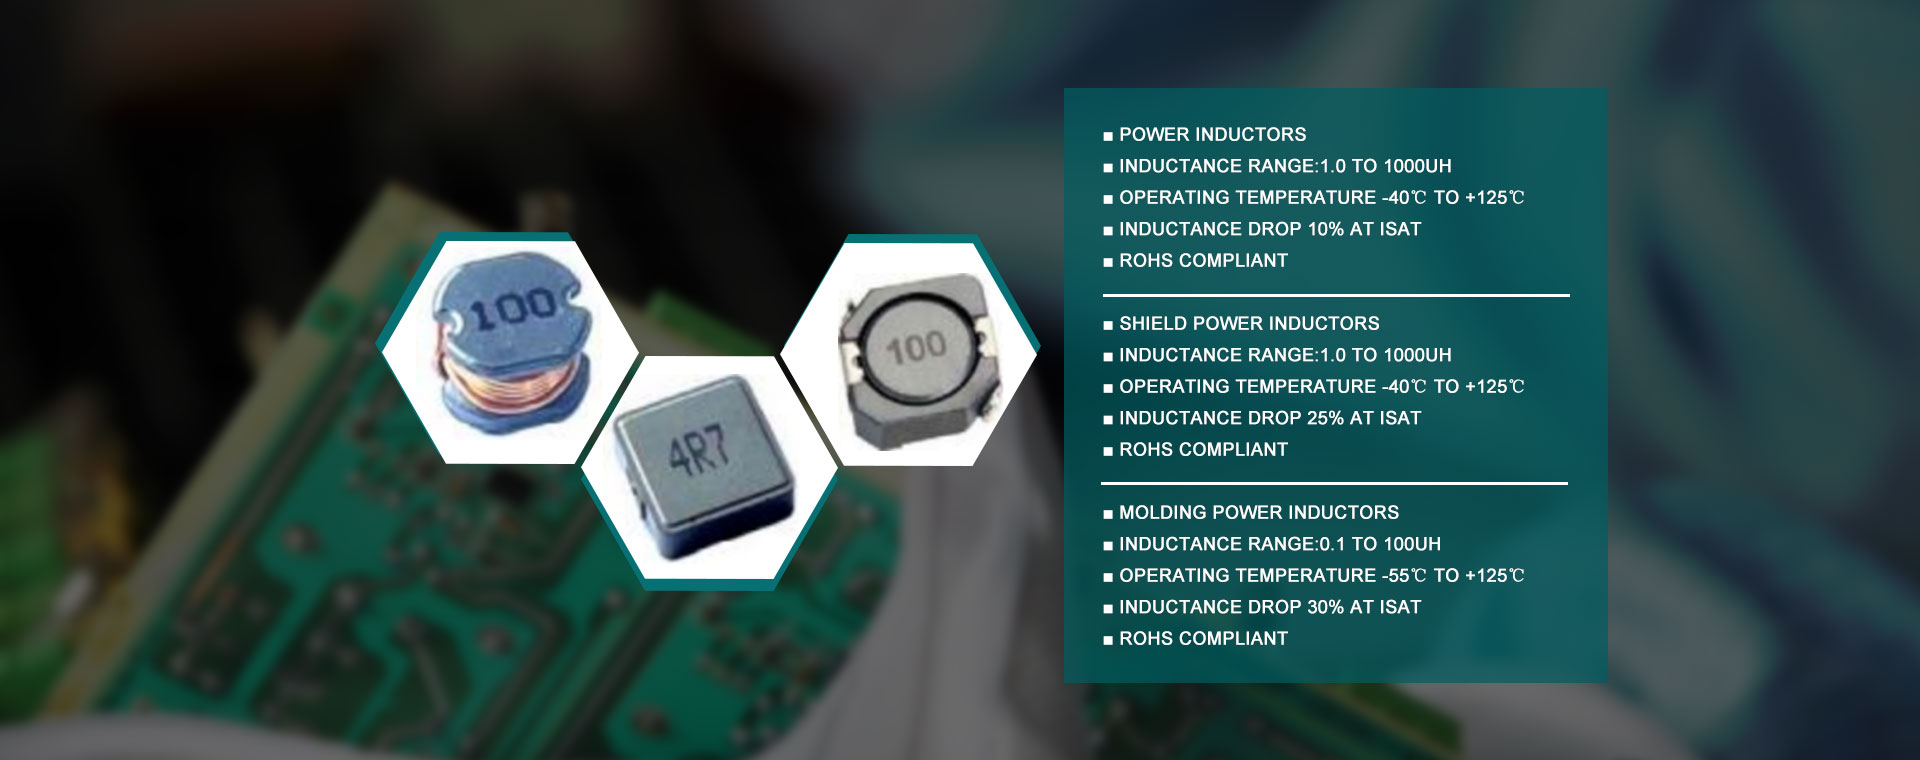 China Power Inductor Suppliers